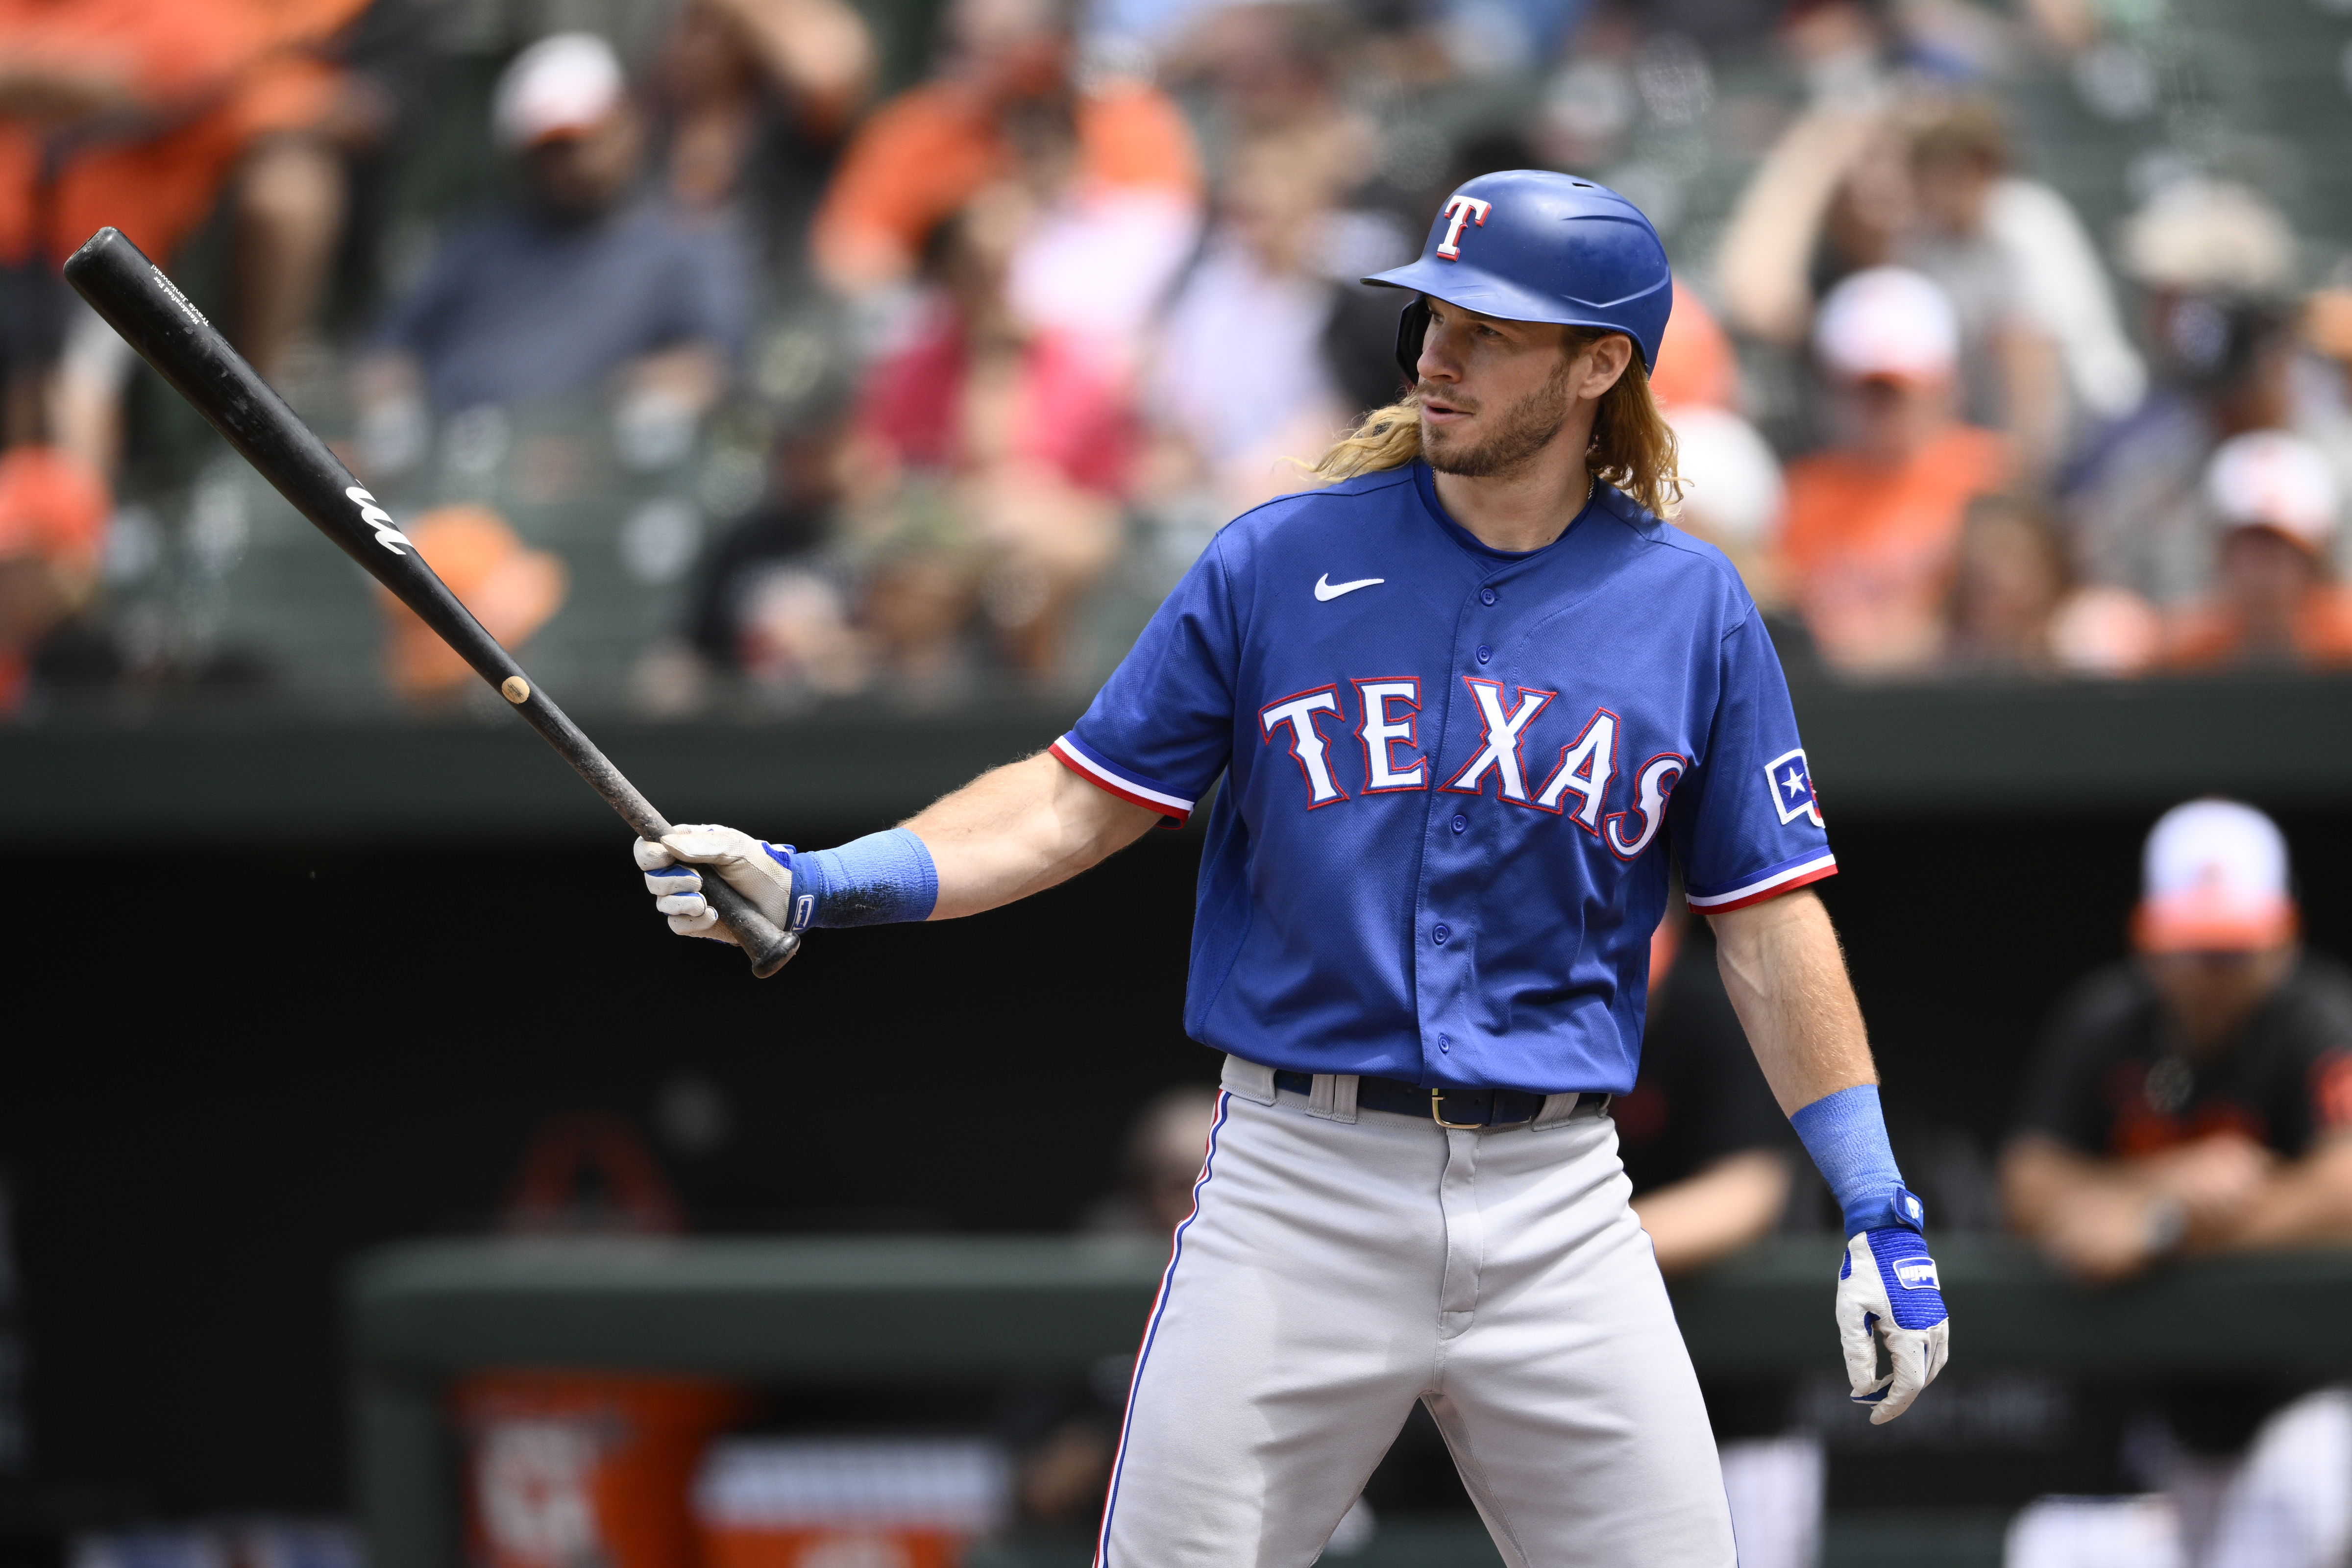 Rangers' Travis Jankowski on his 'Fred' nickname and being part of the all- hair team